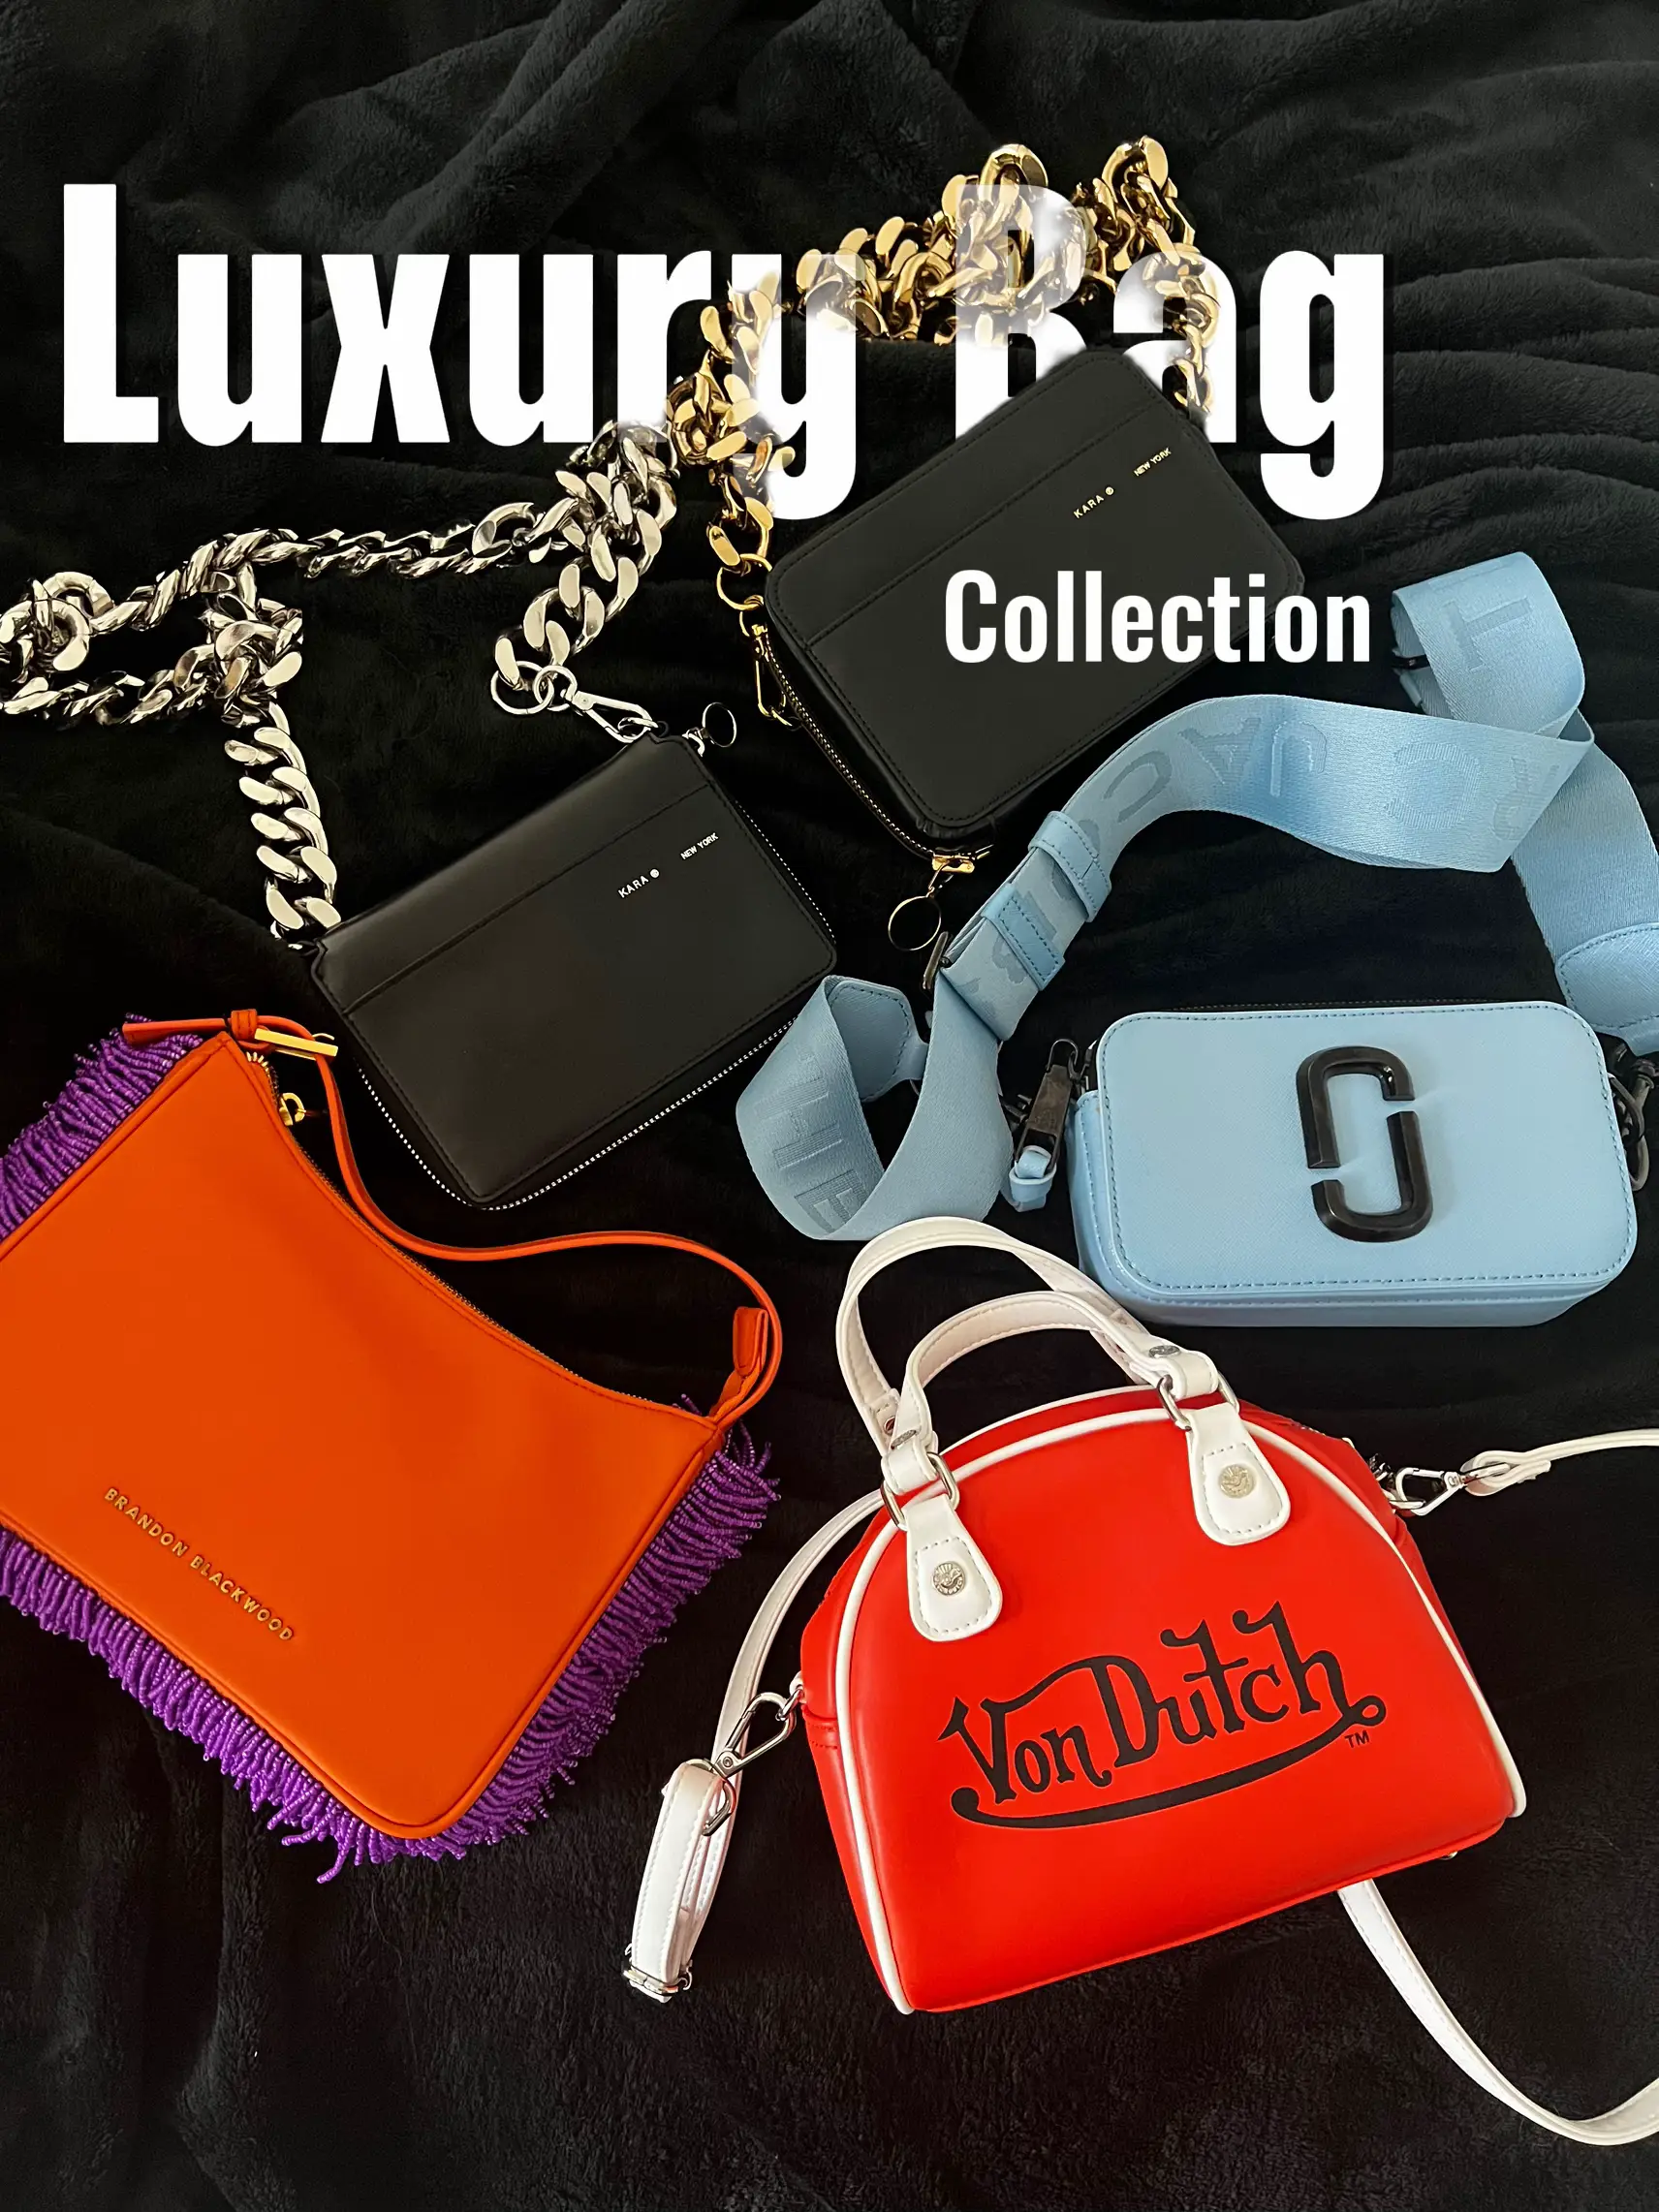 Glamaholic Lifestyle medium red bucket bag and compact wallet